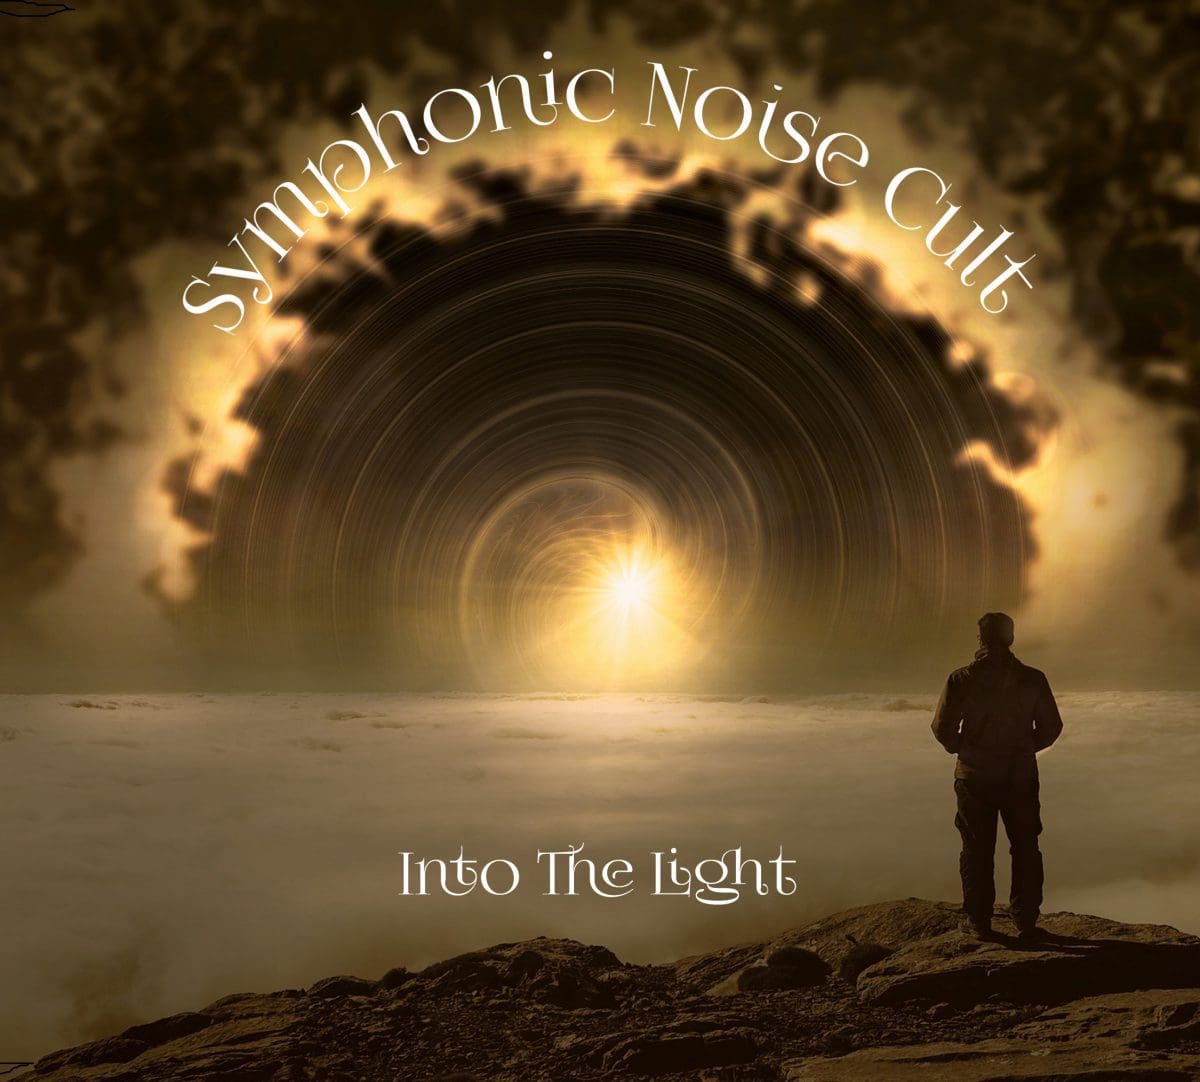 Symphonic Noise Cult to release second single 'Into The Light' on VUZ Records